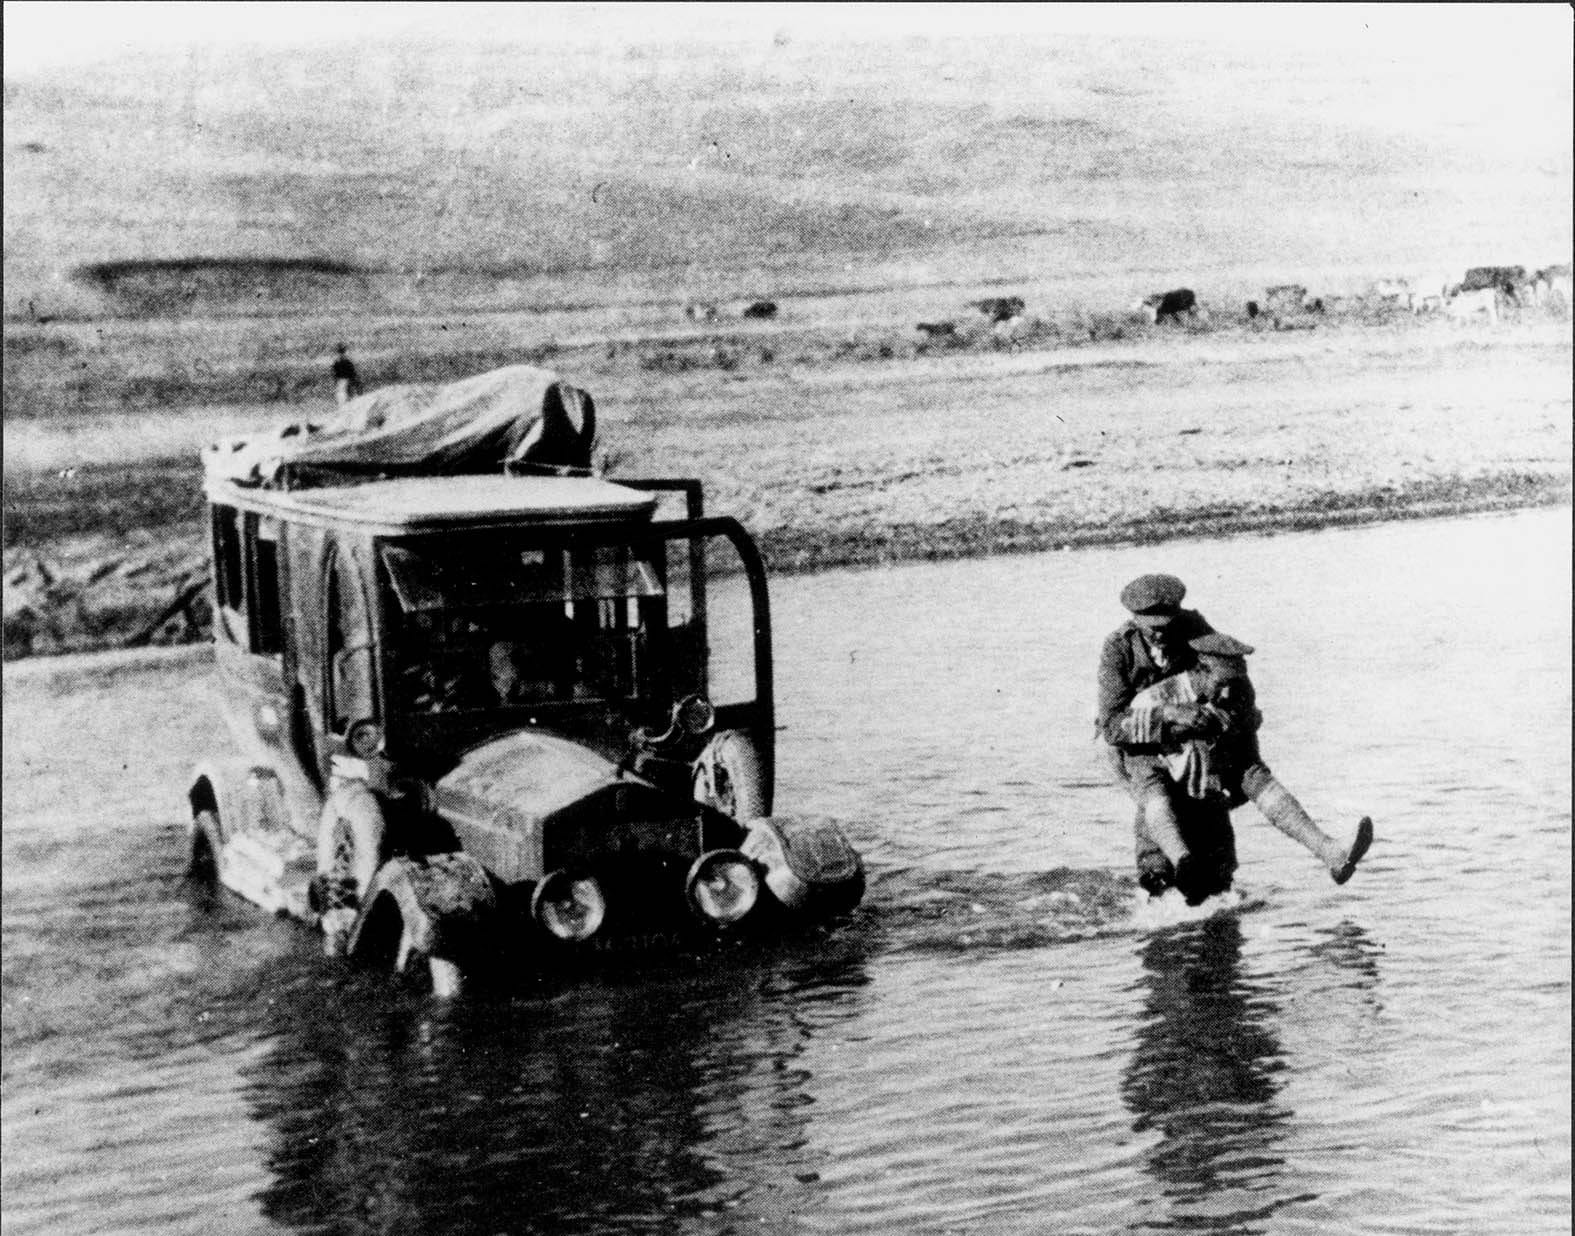 CDR Locker Lampson being carried across a rive